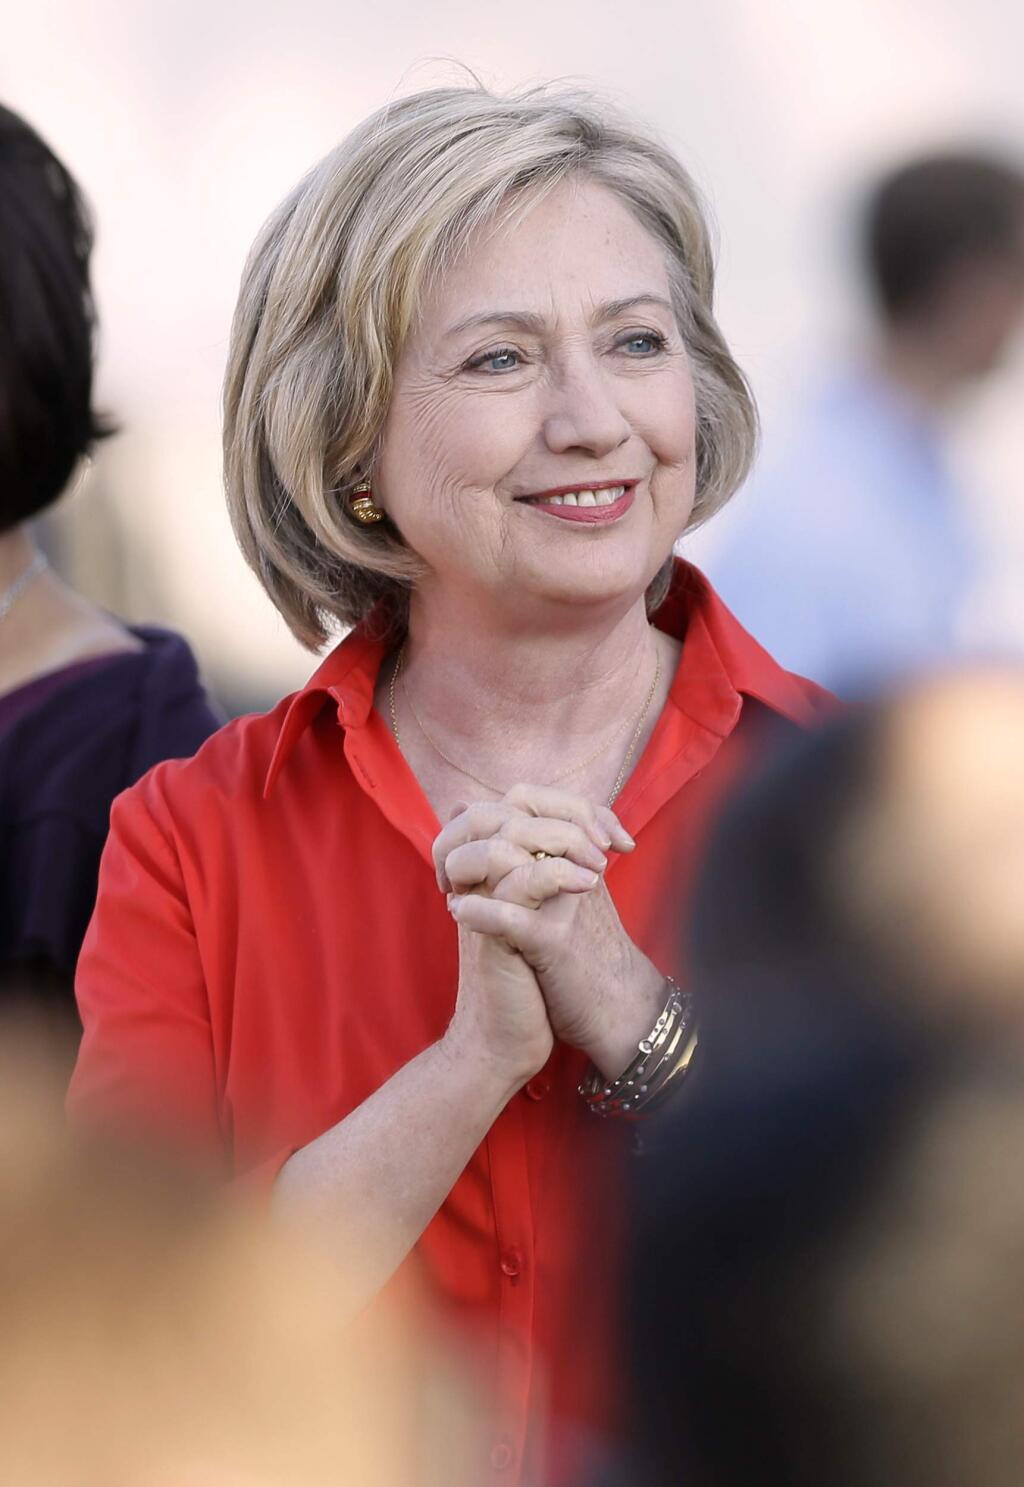 Democratic presidential candidate Hillary Rodham Clinton arrives at a town hall meeting, Tuesday, Nov. 3, 2015, in Coralville, Iowa. (AP Photo/Charlie Neibergall)